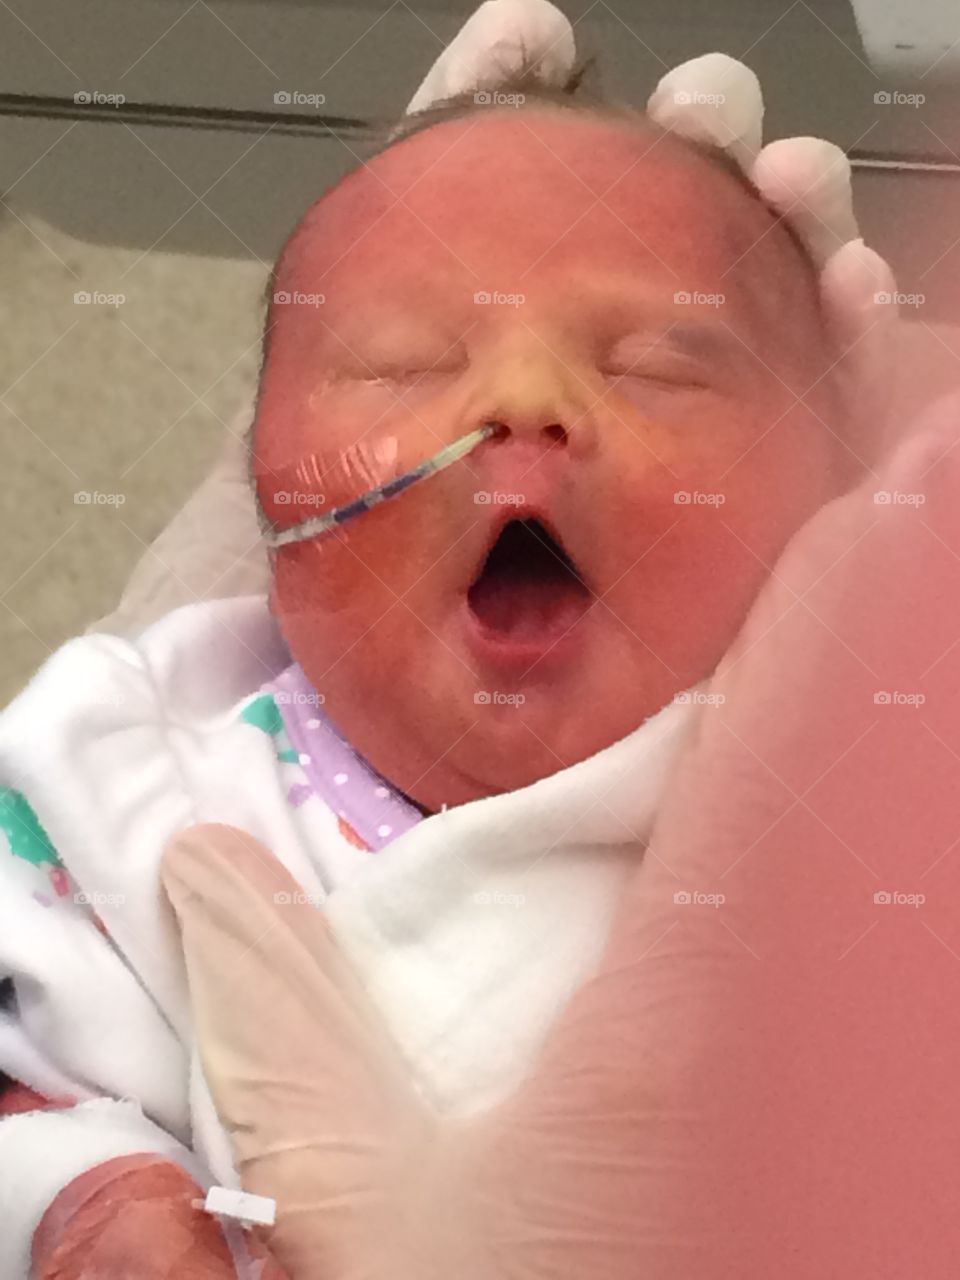 Newborn with Down syndrome soon after birth, yawning, birth diagnosis